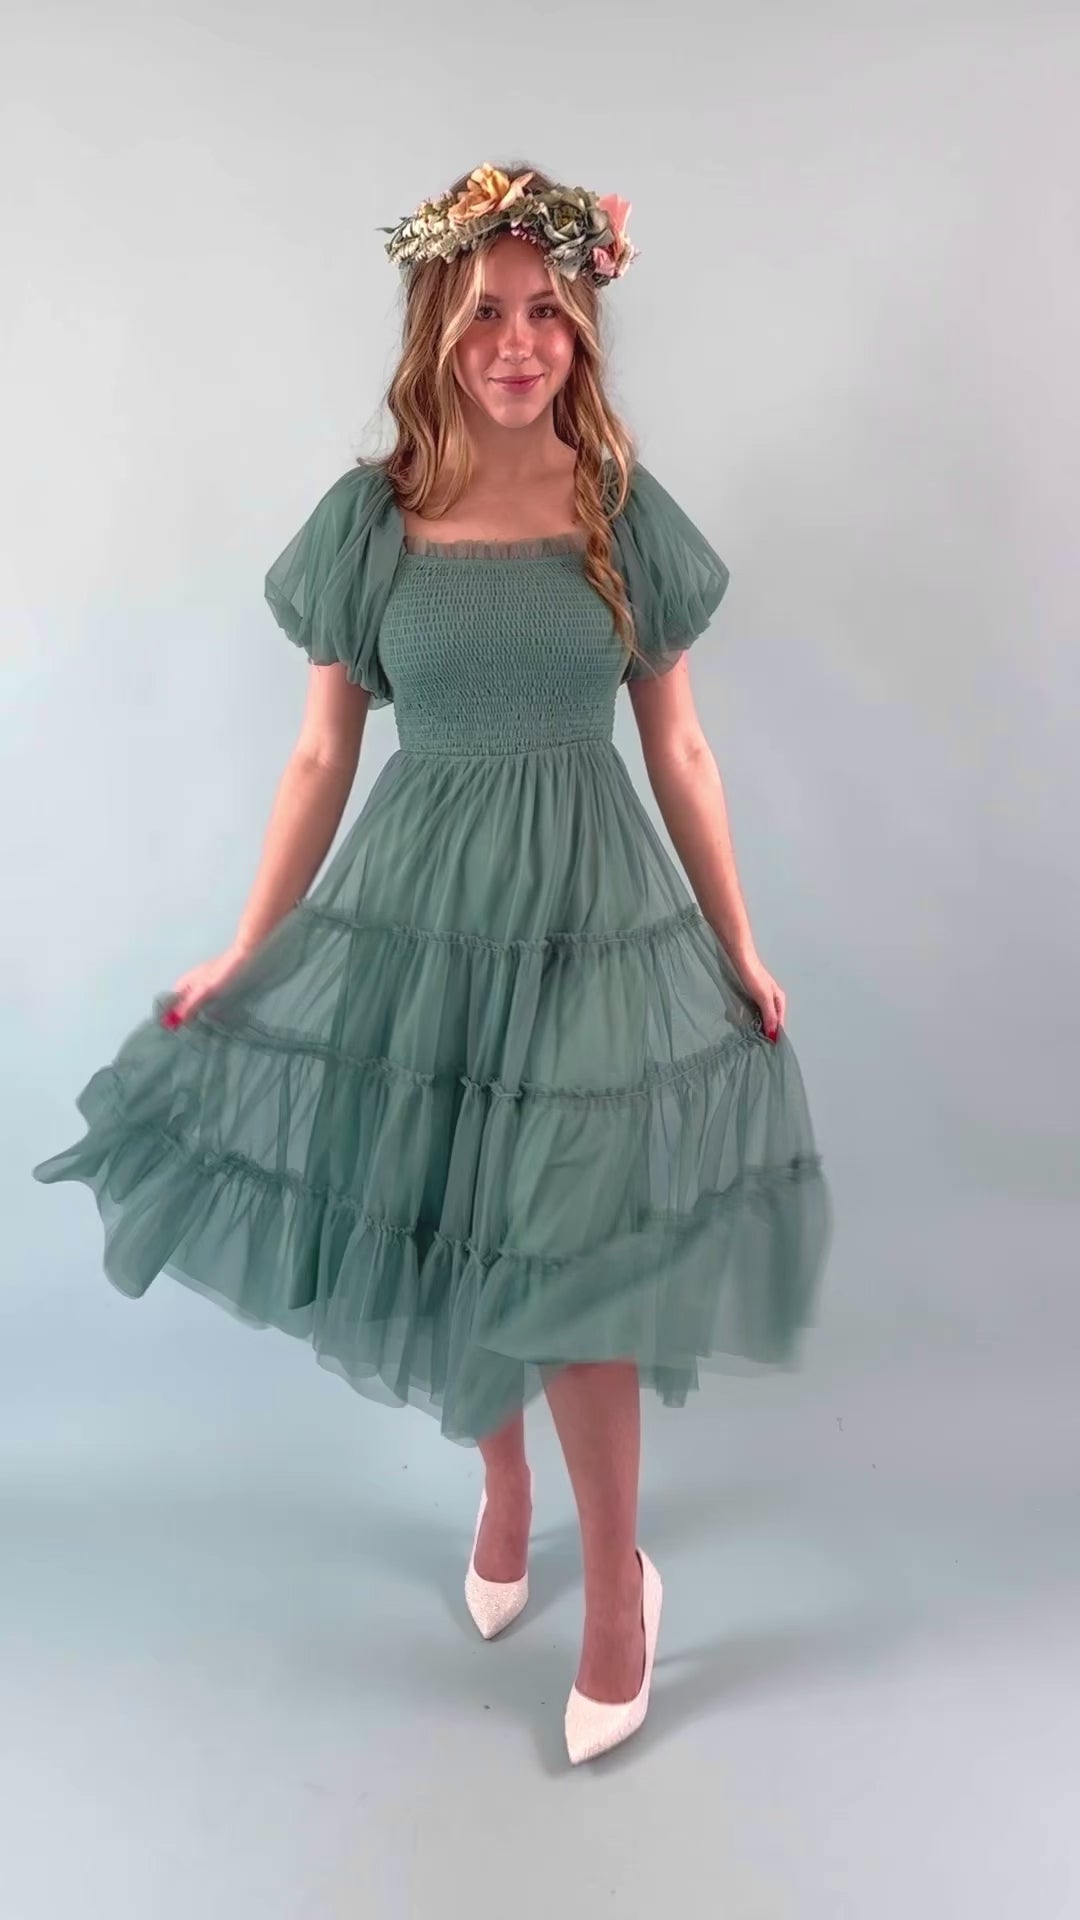 RESTOCK: An Absolute Beauty Tulle Midi Dress-Teal